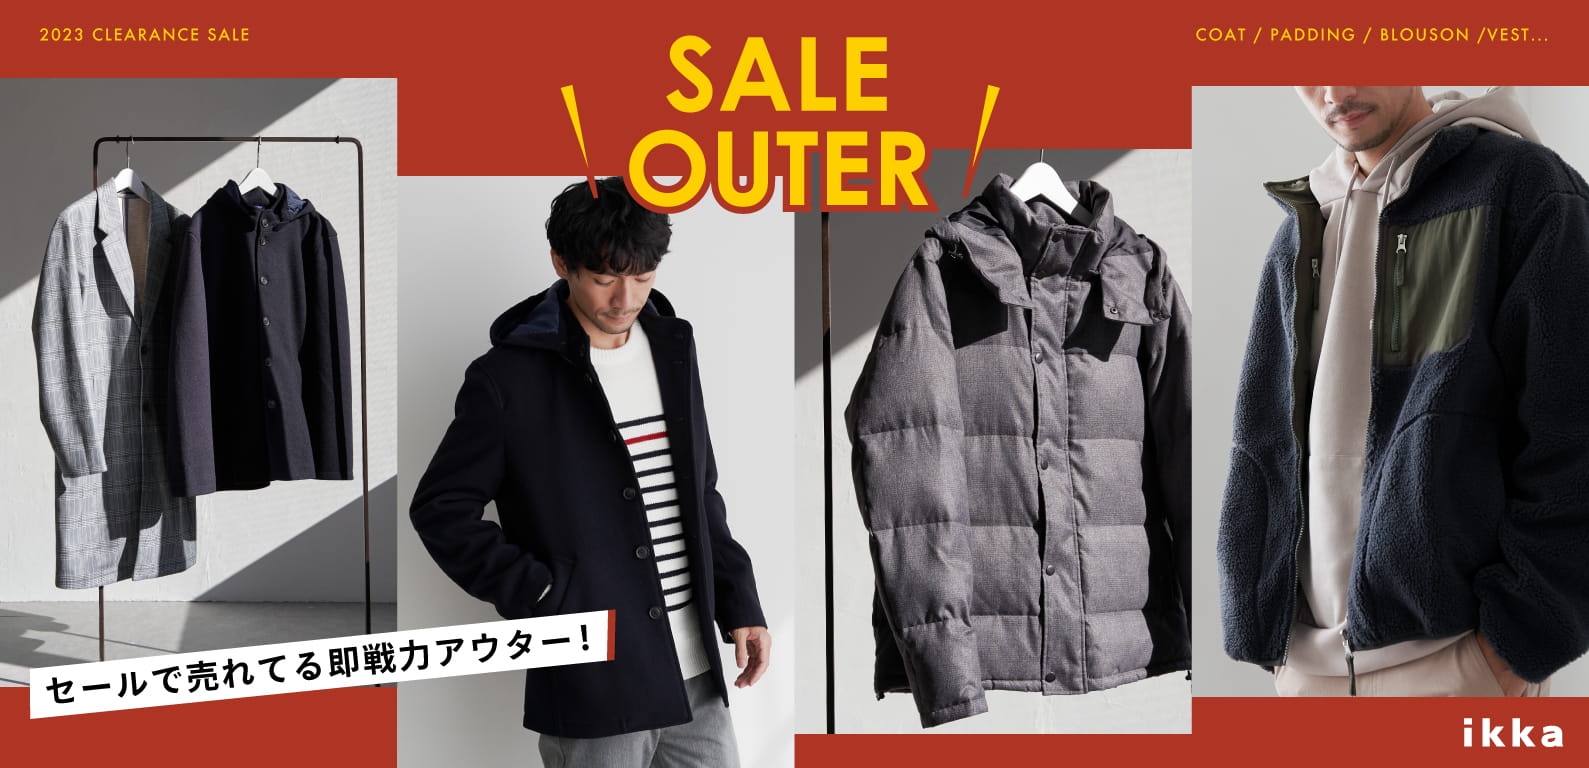 SALE OUTER